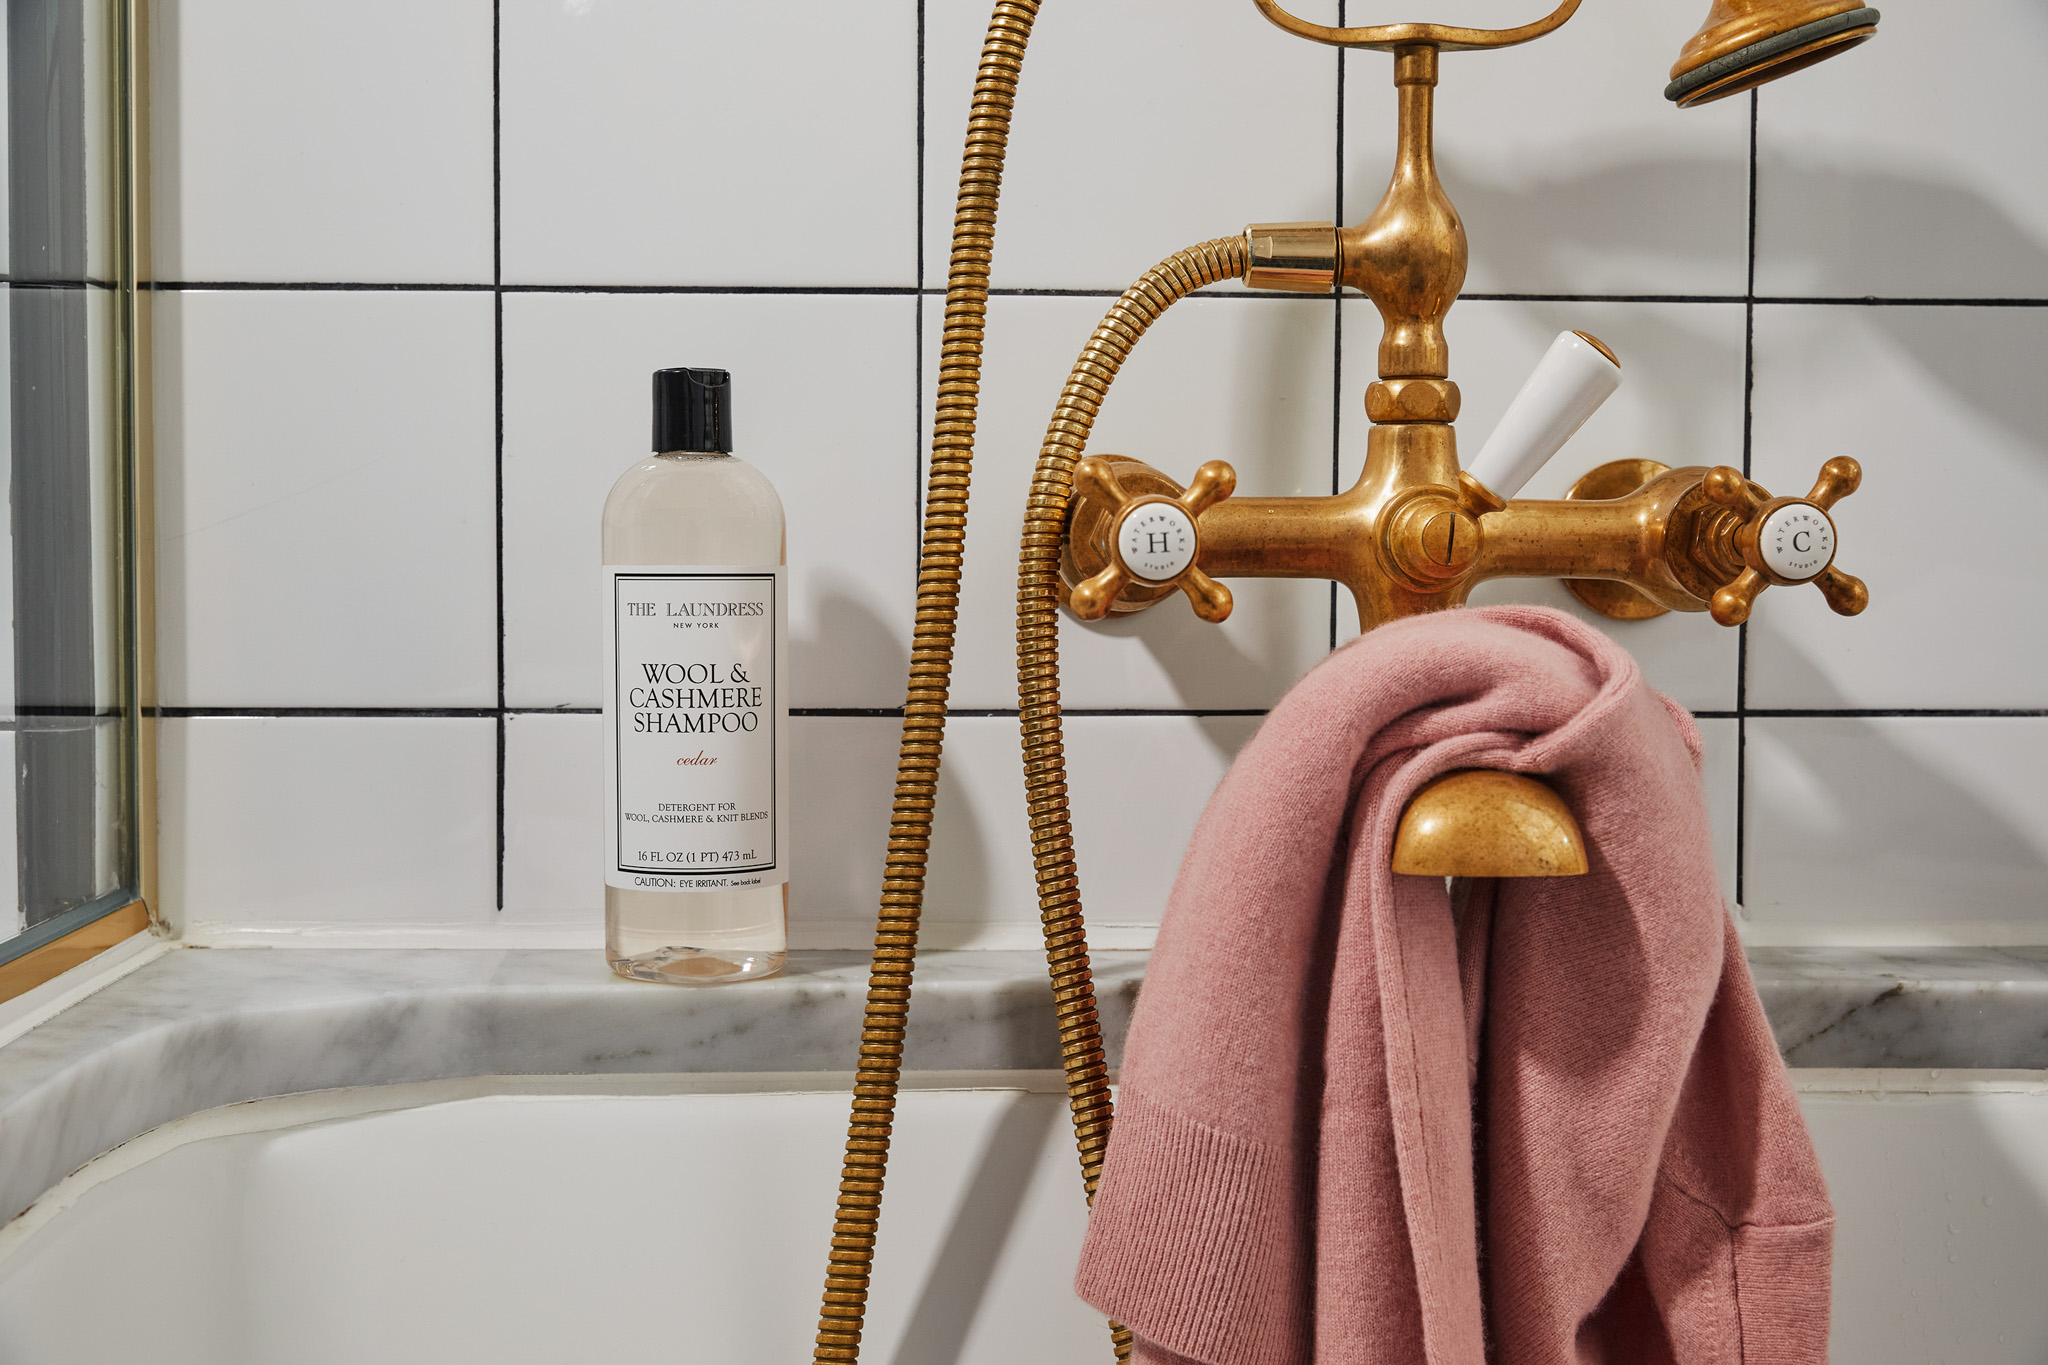 The Laundress Wool & Cashmere Shampoo in the scent 